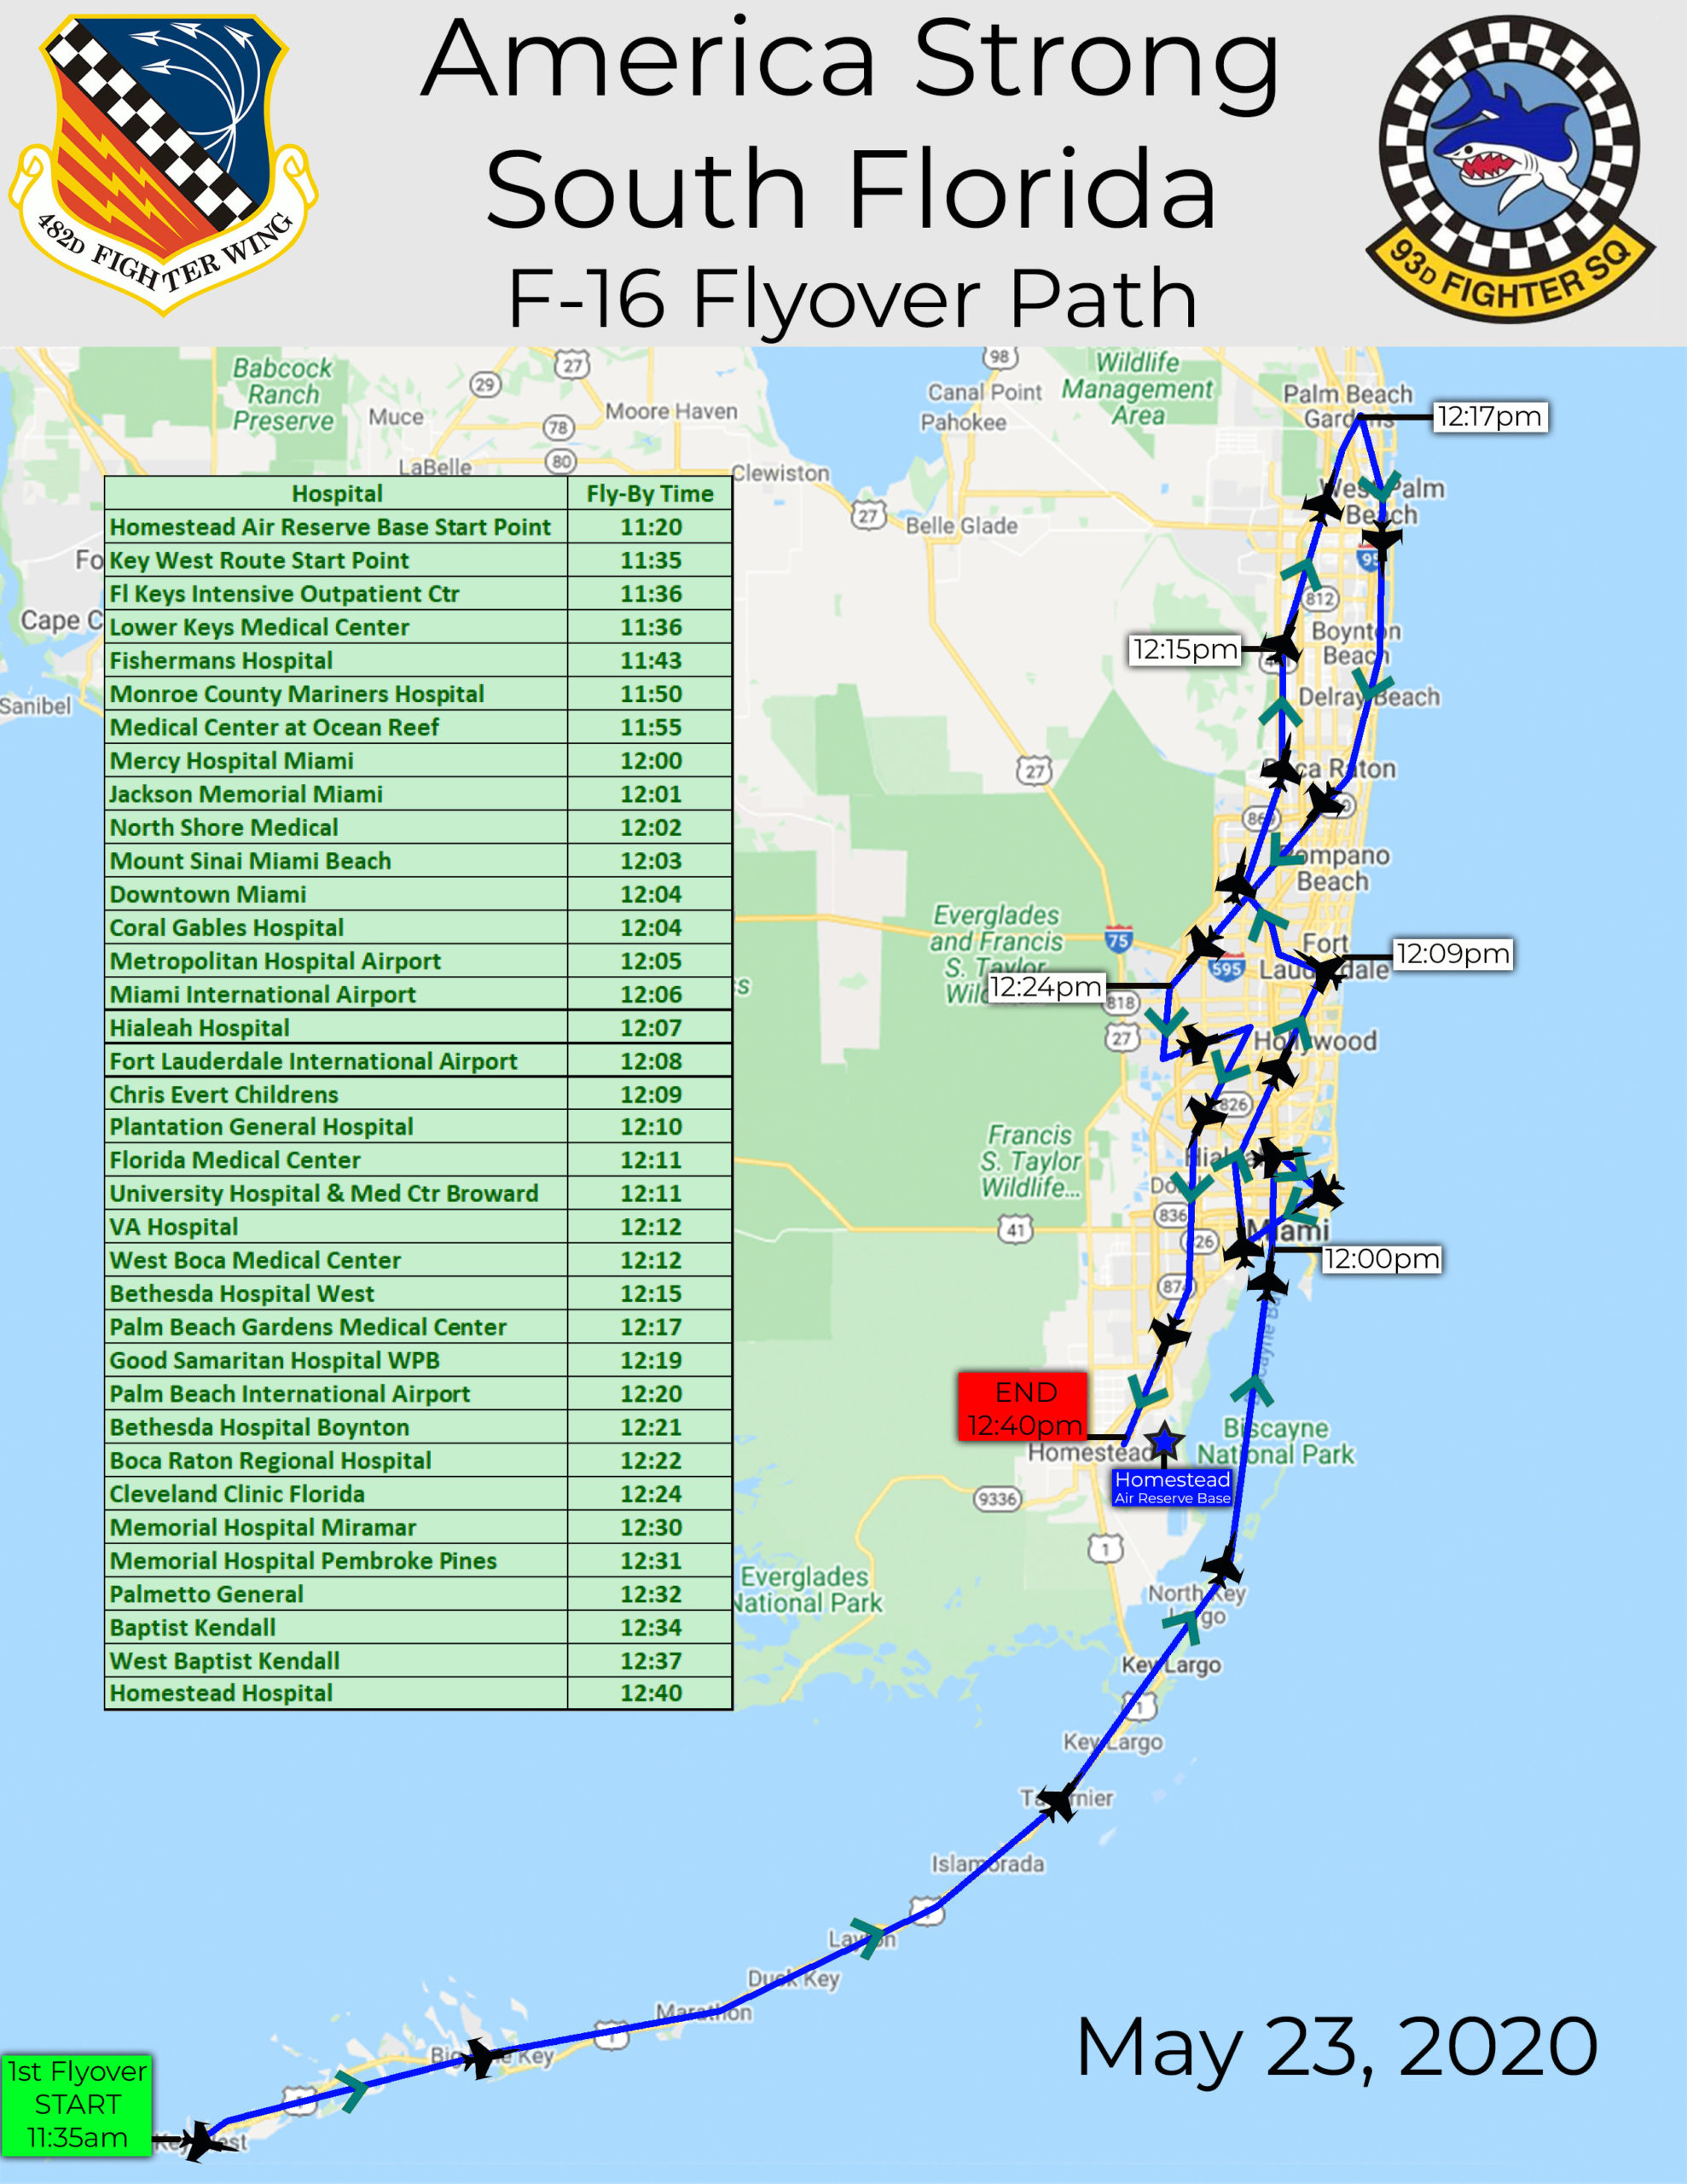 Prepare for Another Exciting South Florida Flyover May 23 1